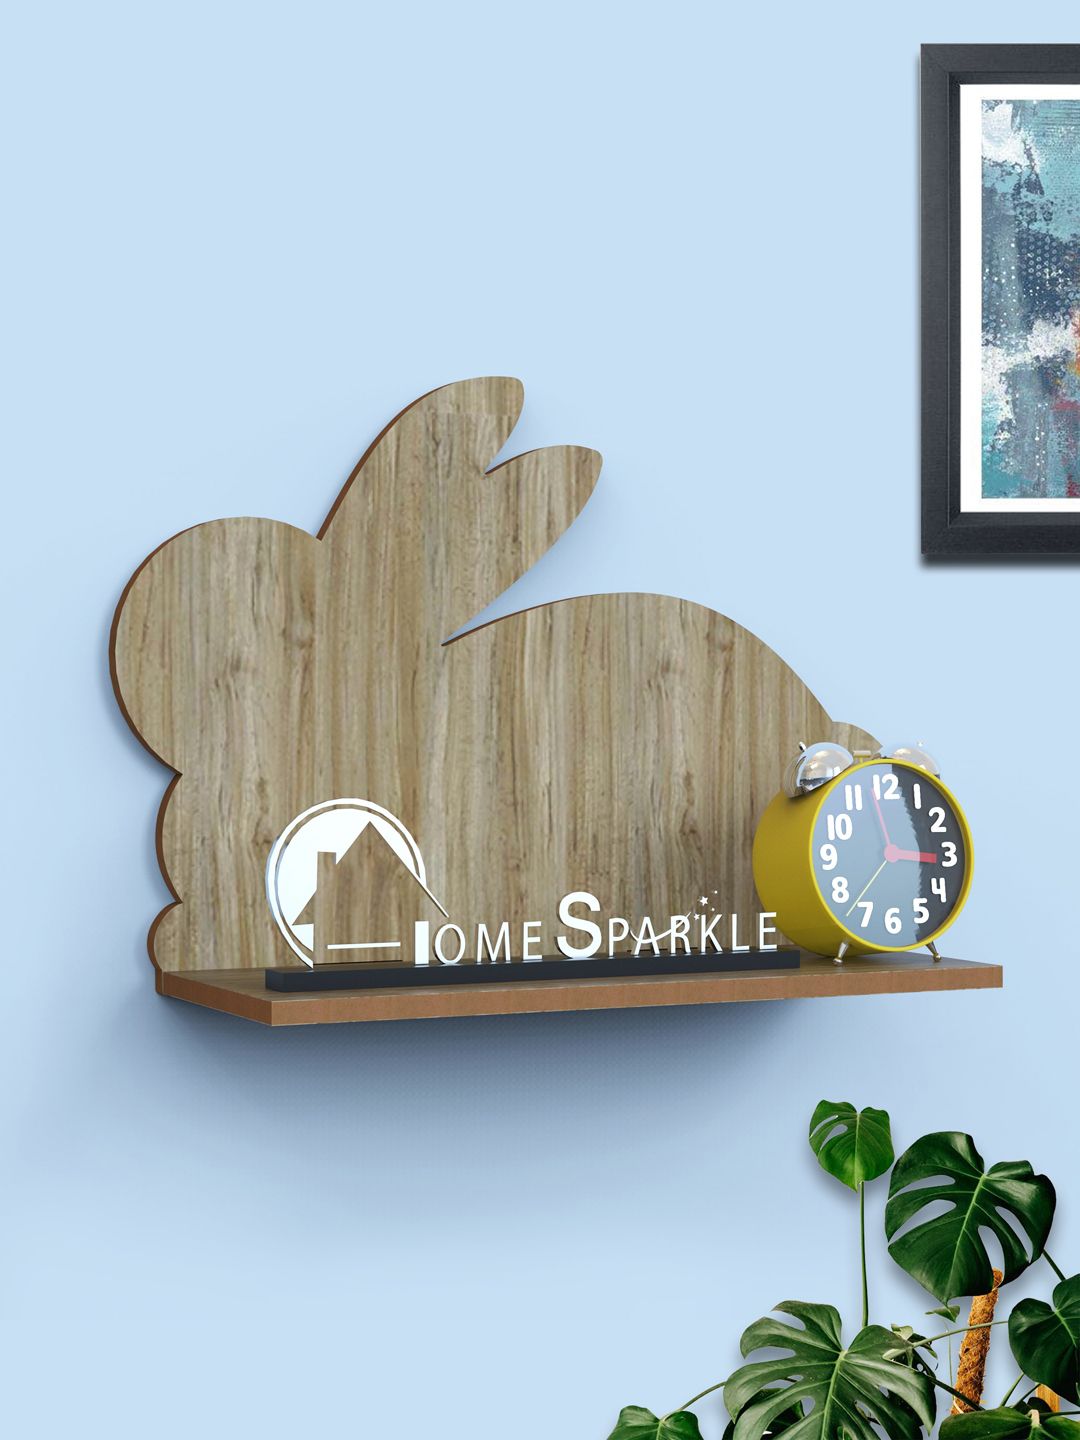 Home Sparkle Brown MDF Rabbit Shaped Wall Shelf Price in India